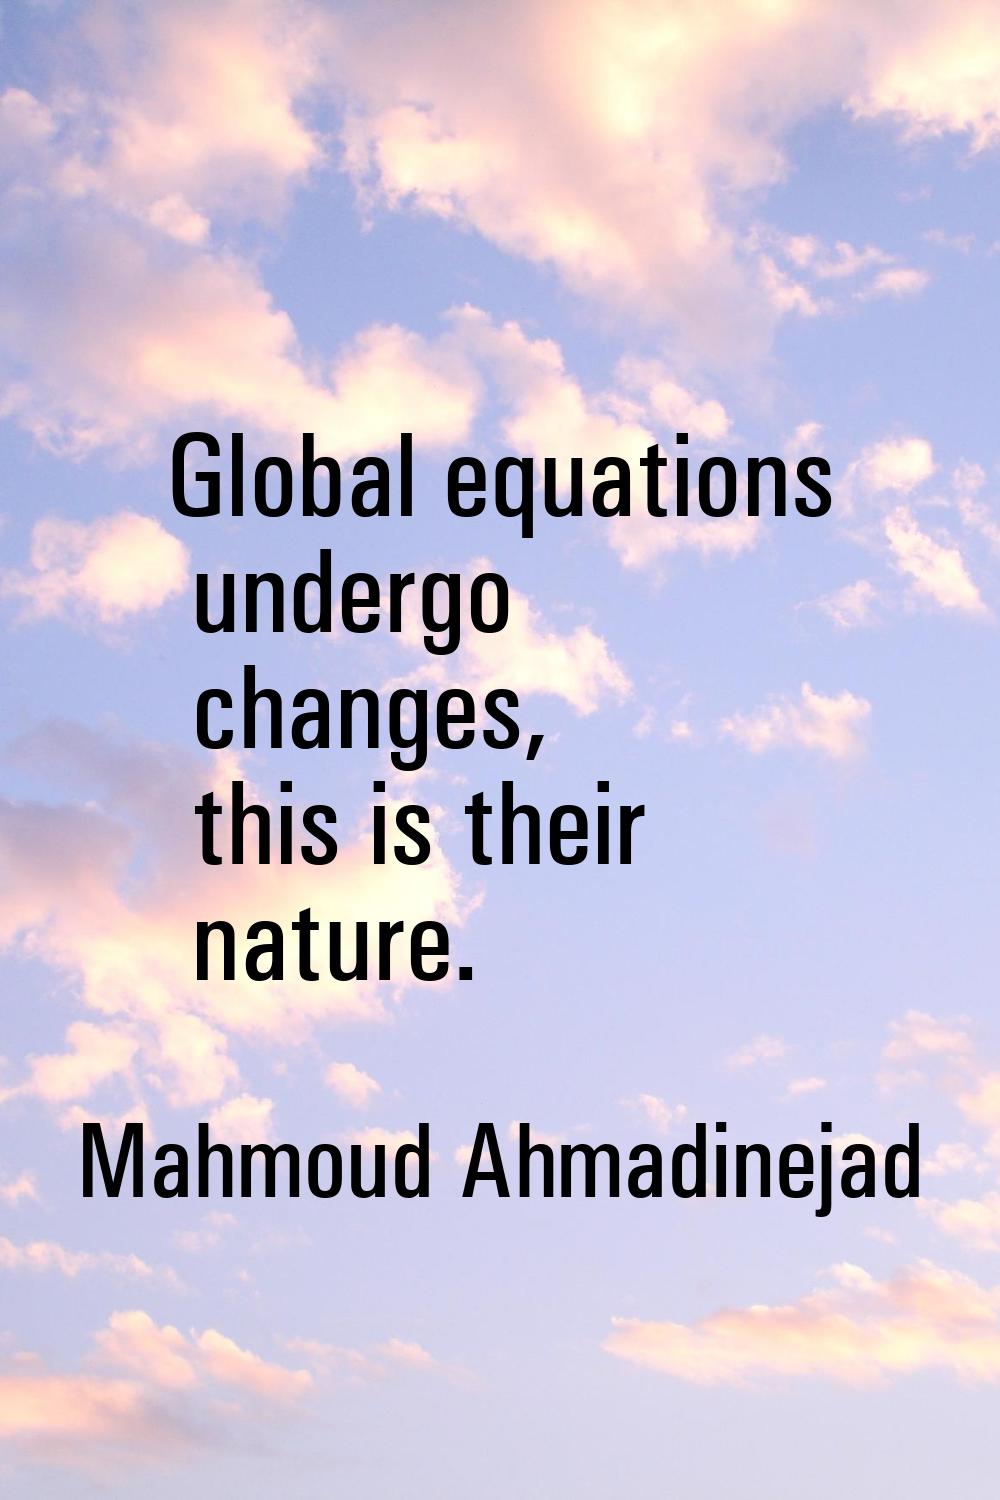 Global equations undergo changes, this is their nature.